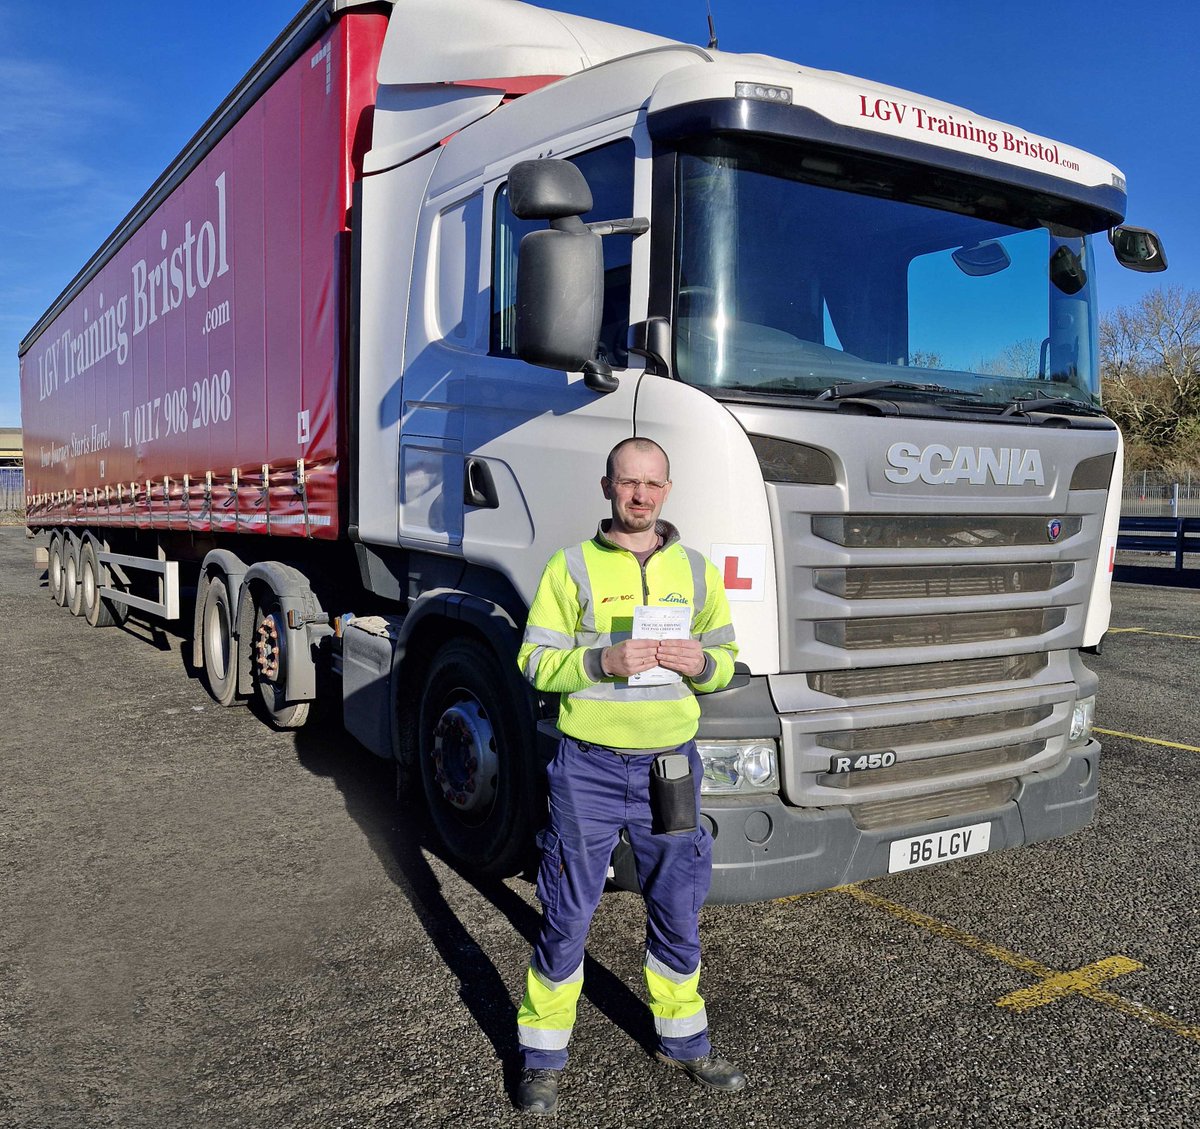 Huge Congratulations to Varis, on a well deserved first time, Cat.C+E test pass today. Keep up the safe driving mate. We wish you all the very best for the future! LGVTrainingBristol.com #YourJourneyStartsHere